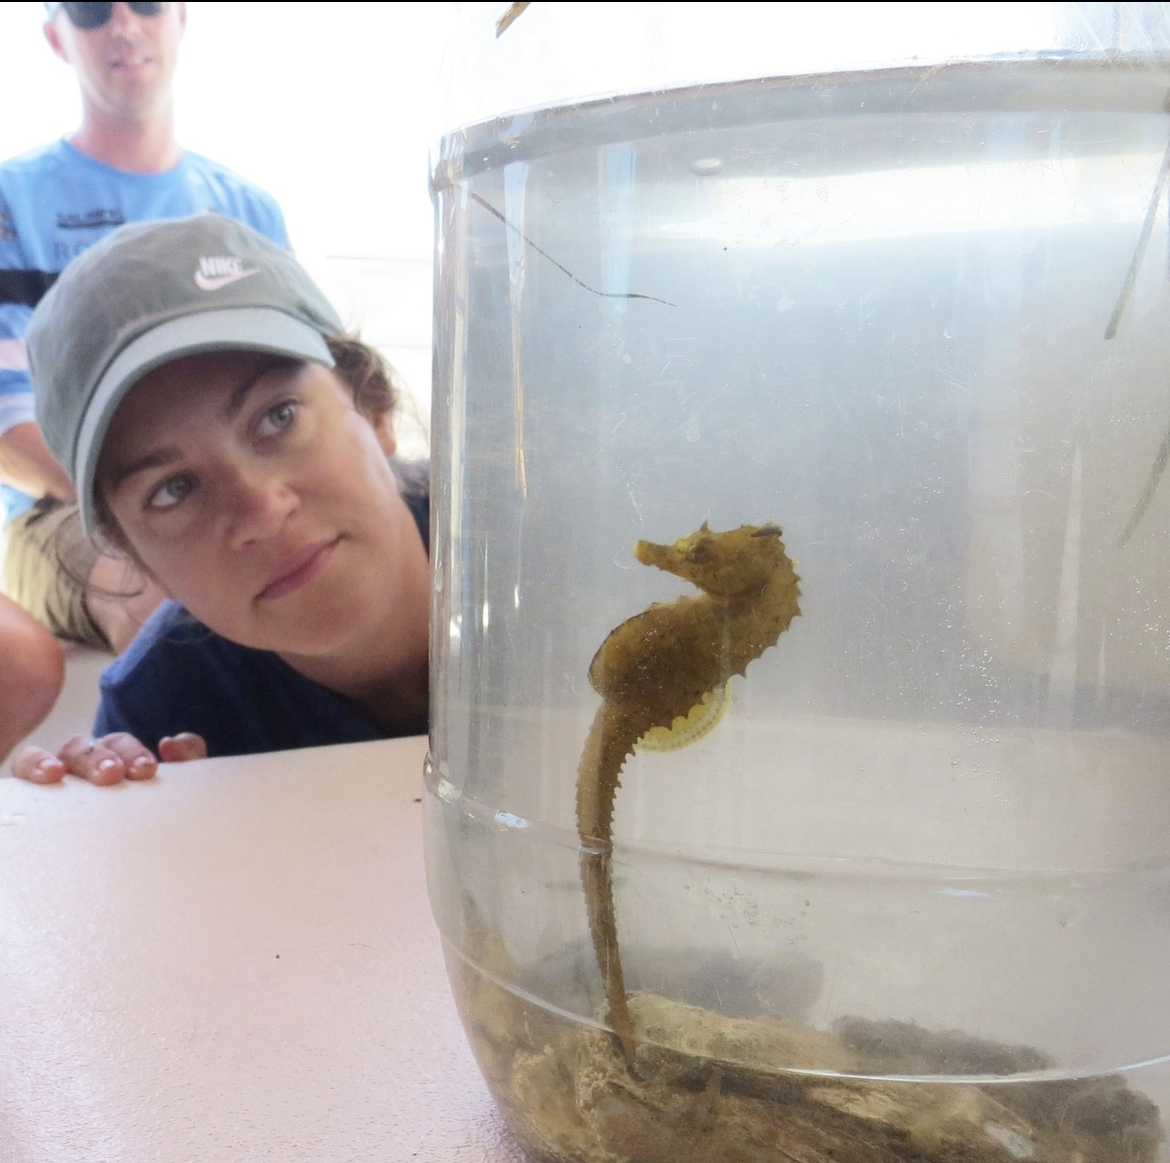 Shaigh Sisk, a woman with curly brown hair pulled back in a braid, leans to her right to stare intently at a container filled with water and holding a small yellow seahorse. Shaigh wears a green hat and navy tee, and other people are visible sitting behind her. The container with the seahorse takes up most of the image, with the seahorse's delicate spines and curved yellow back fin clearly visible.